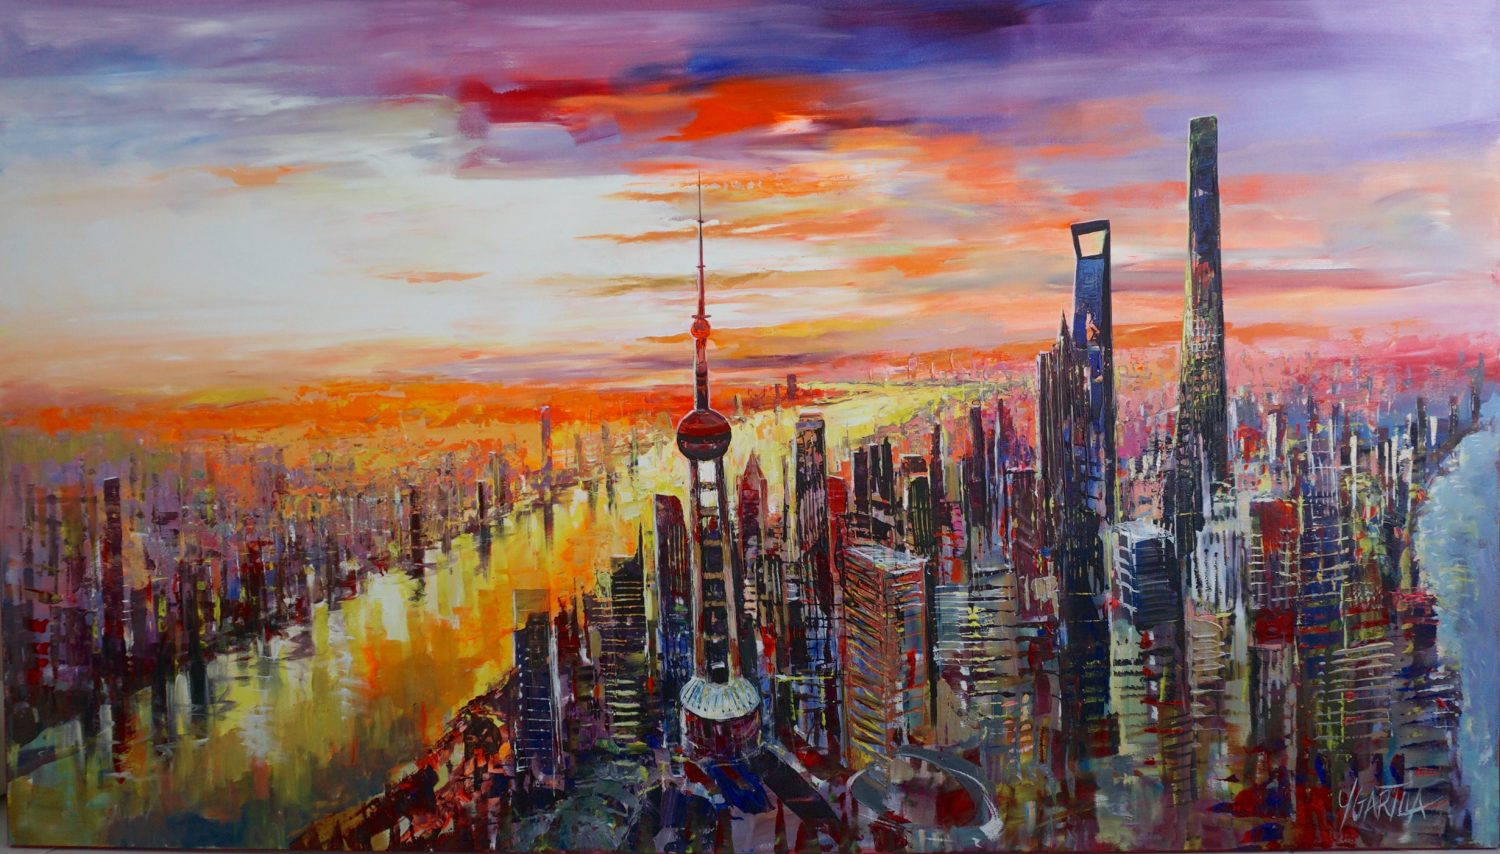 City of Shanghai skyline with river view and sunset.